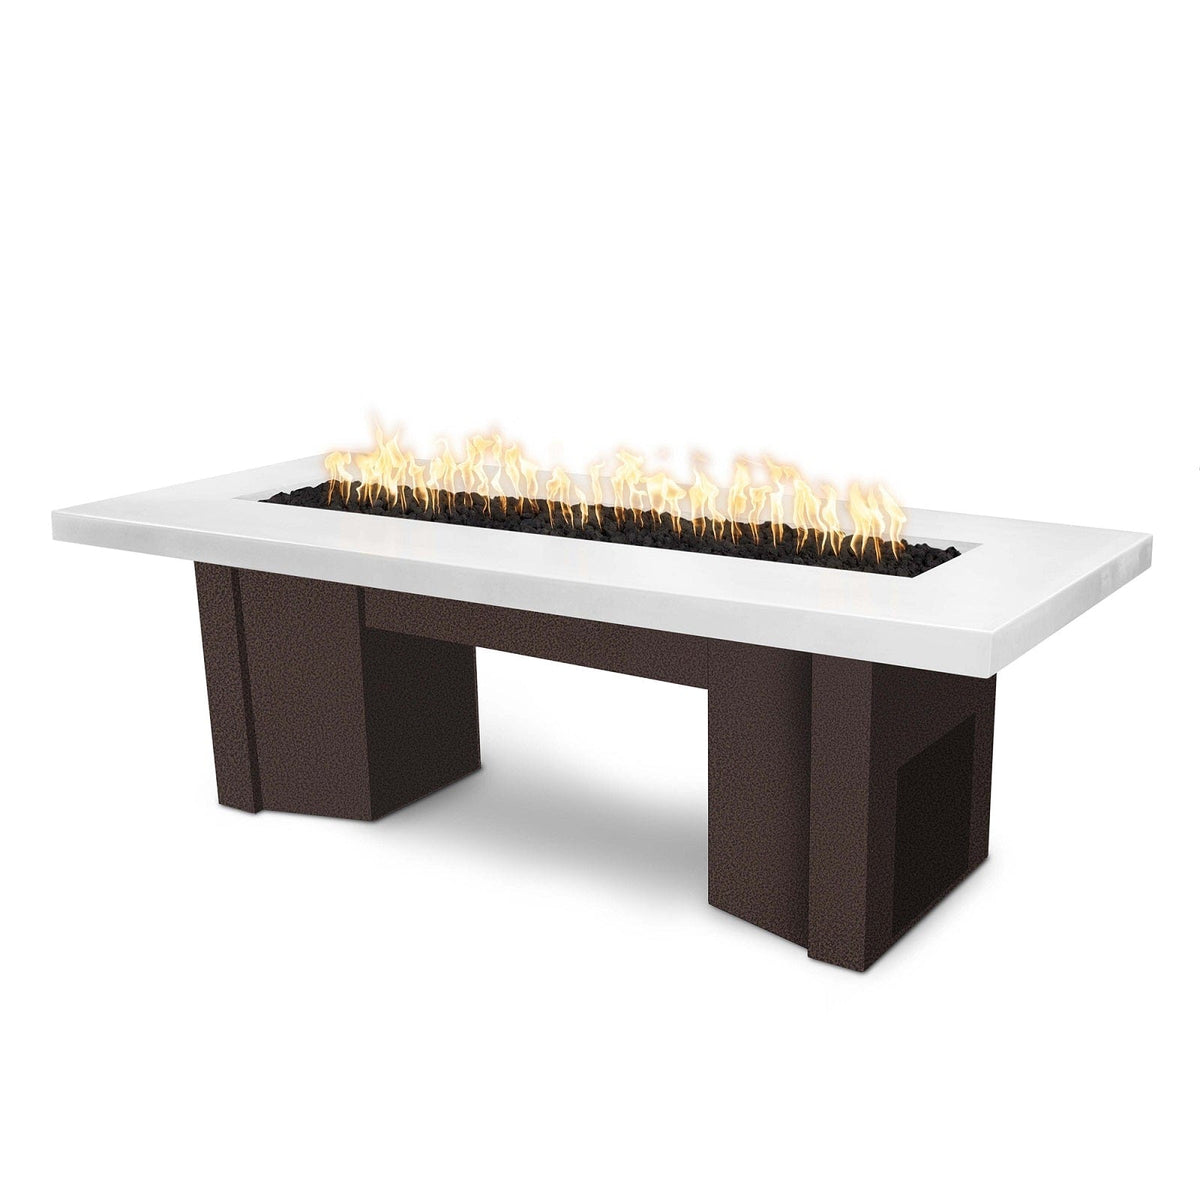 The Outdoor Plus Fire Features Limestone (-LIM) / Copper Vein Powder Coated Steel (-CPV) The Outdoor Plus 60&quot; Alameda Fire Table Smooth Concrete in Liquid Propane - Flame Sense System with Push Button Spark Igniter / OPT-ALMGFRC60FSEN-LP